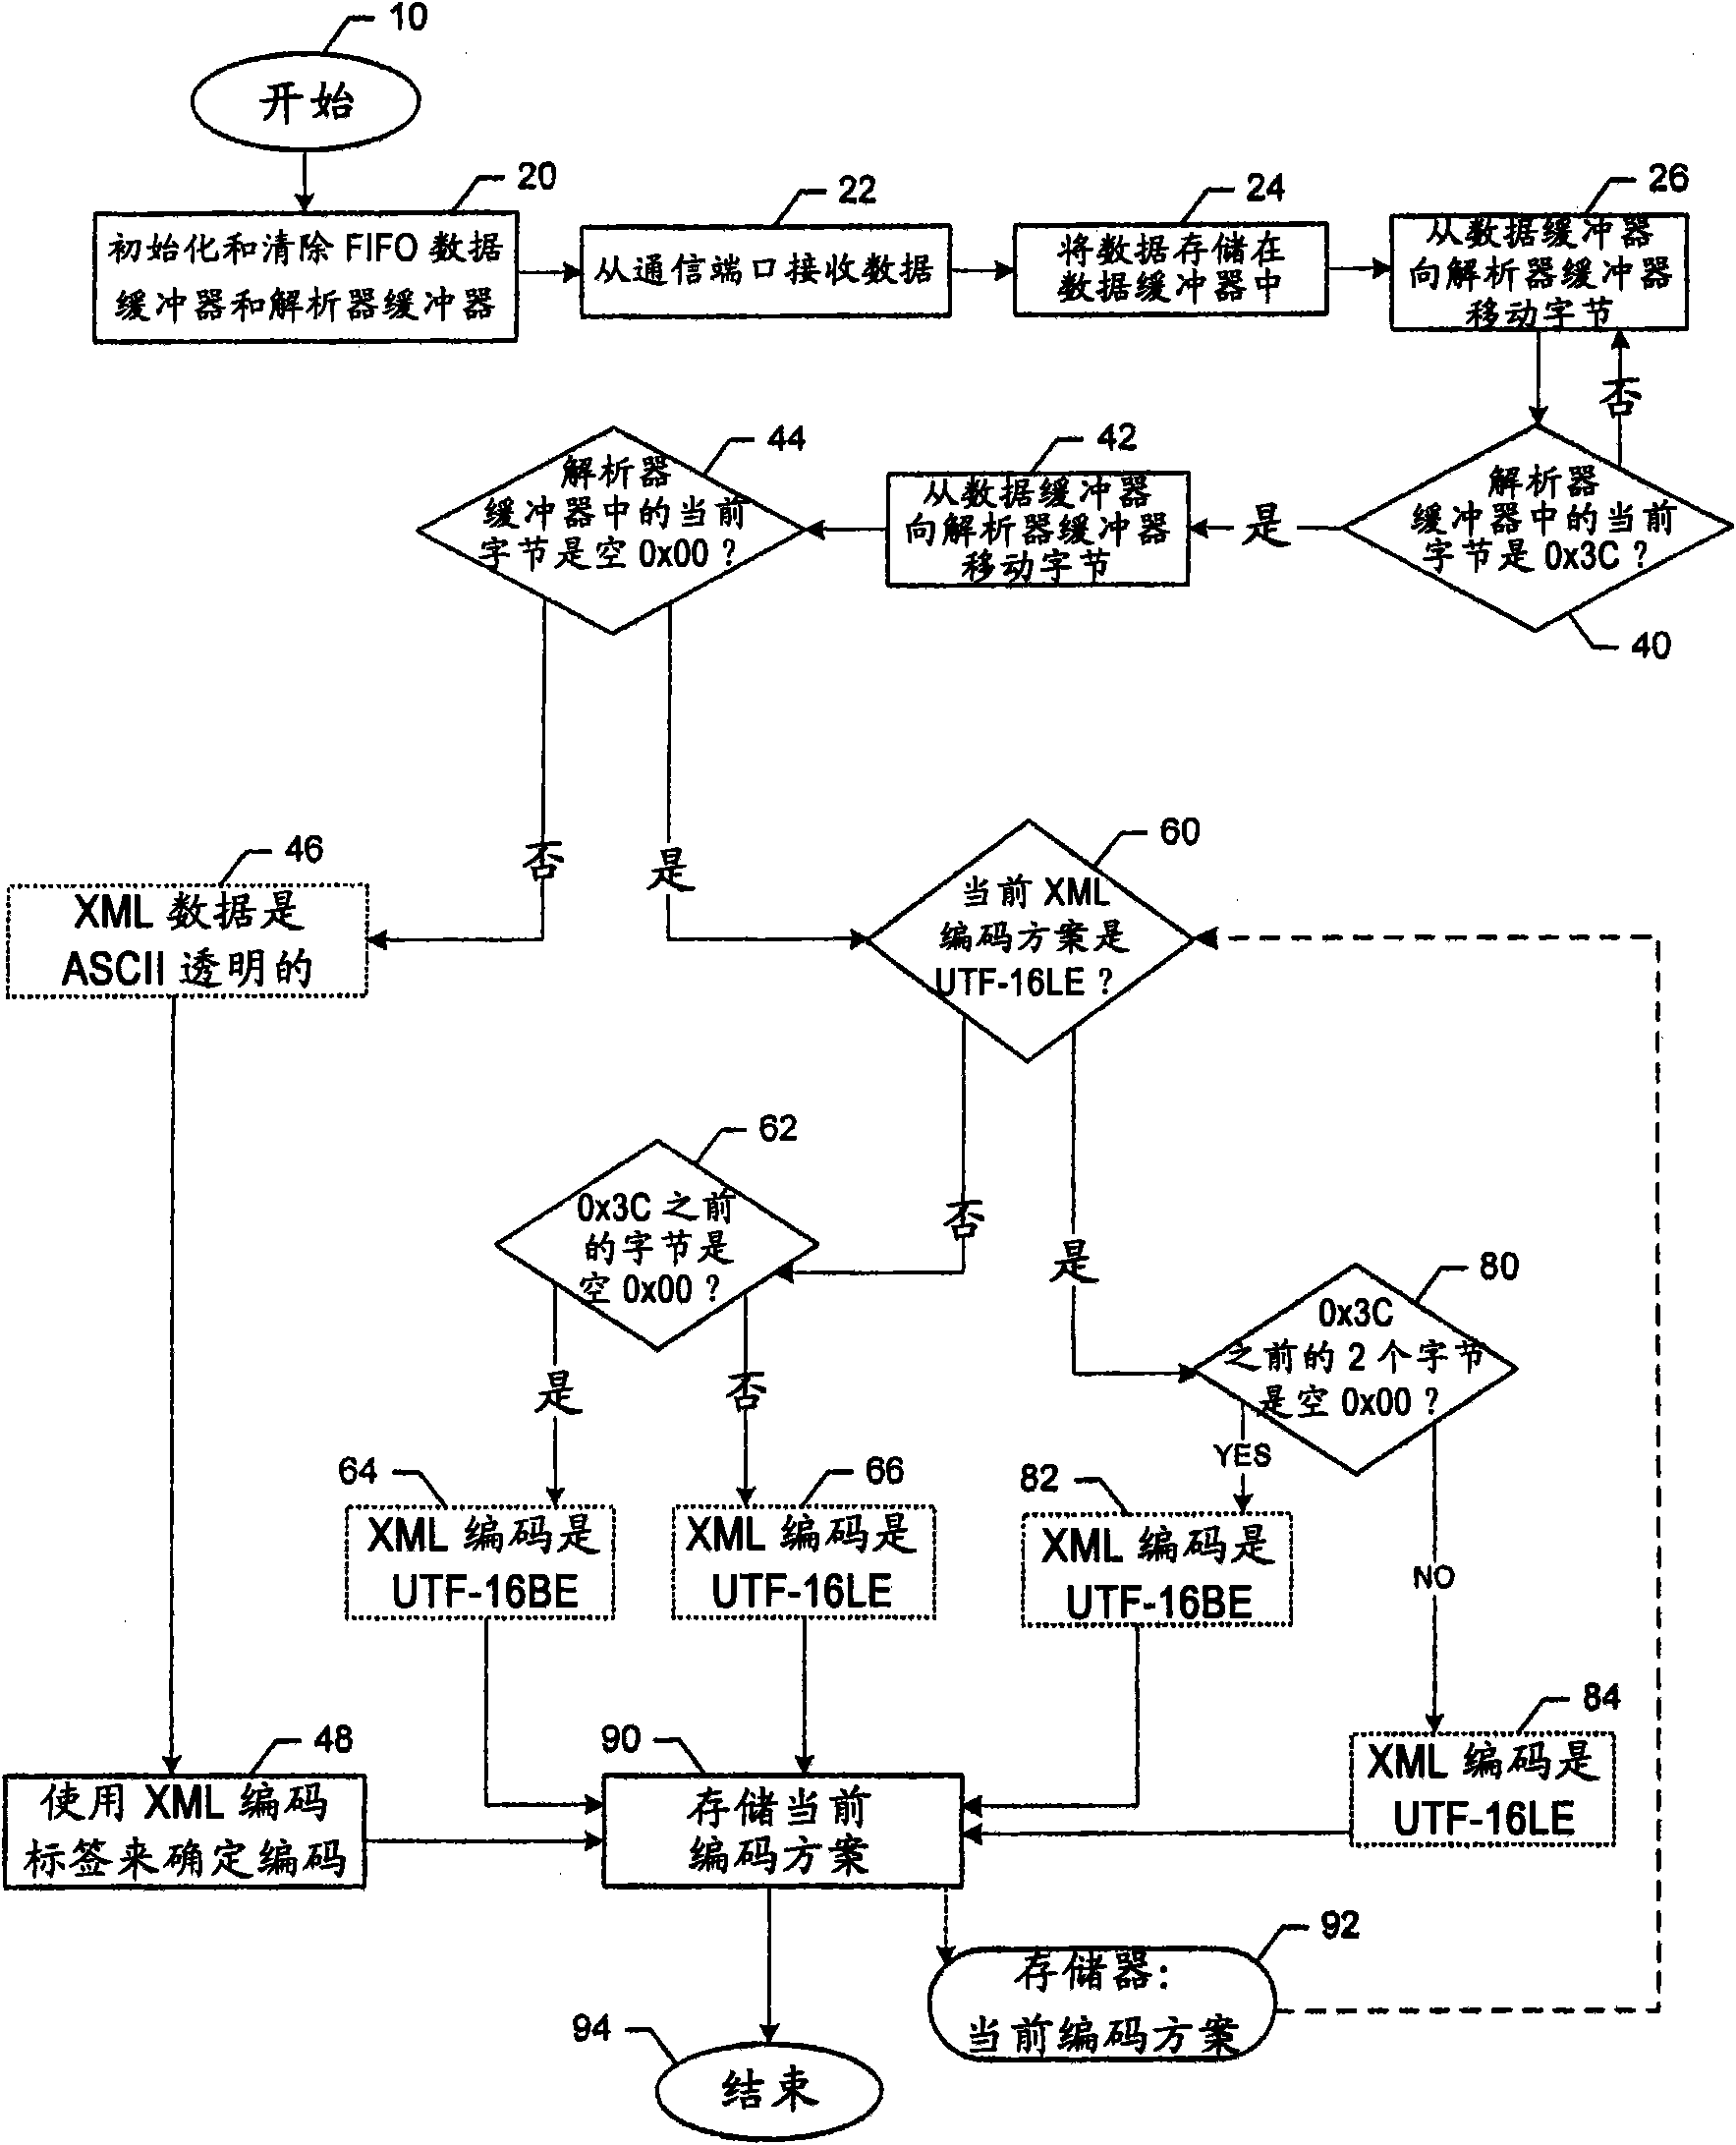 Detection of UTF-16 encoding in streaming XML data without a byte-order mark and related printers, systems, methods, and computer program products